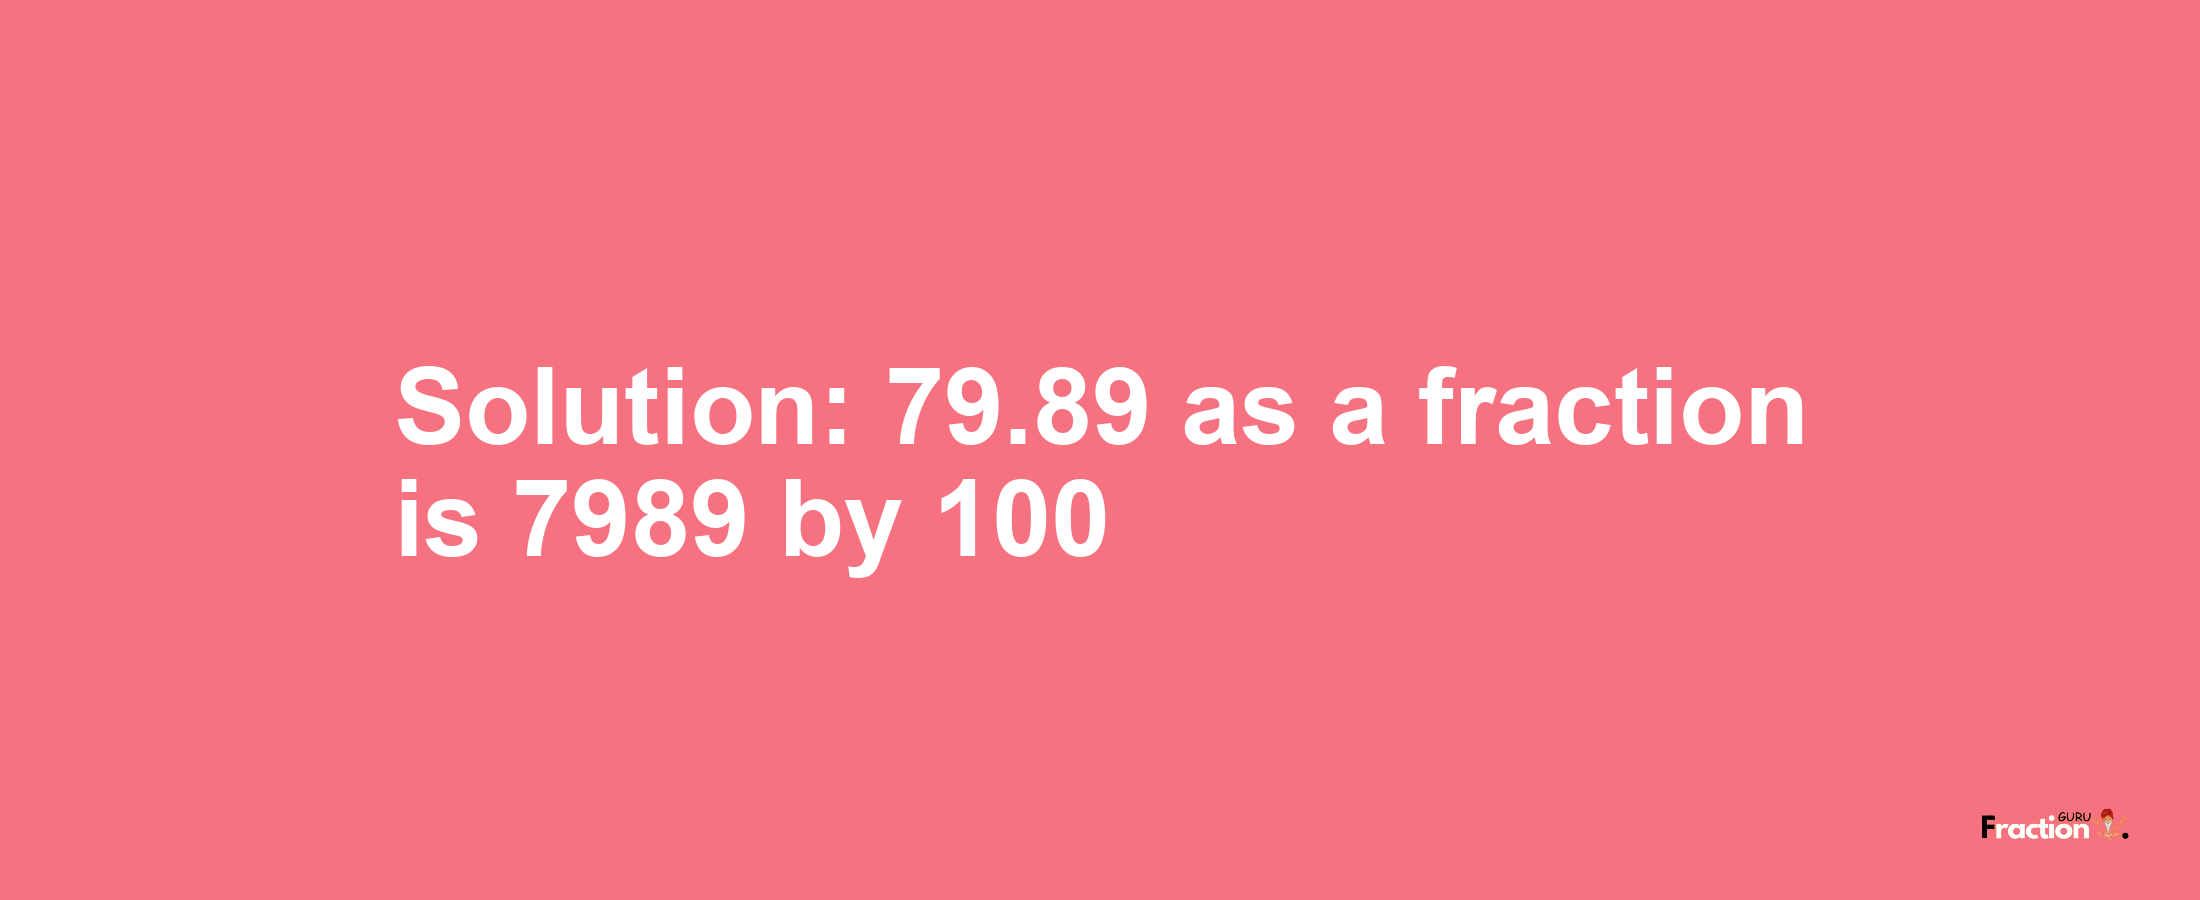 Solution:79.89 as a fraction is 7989/100